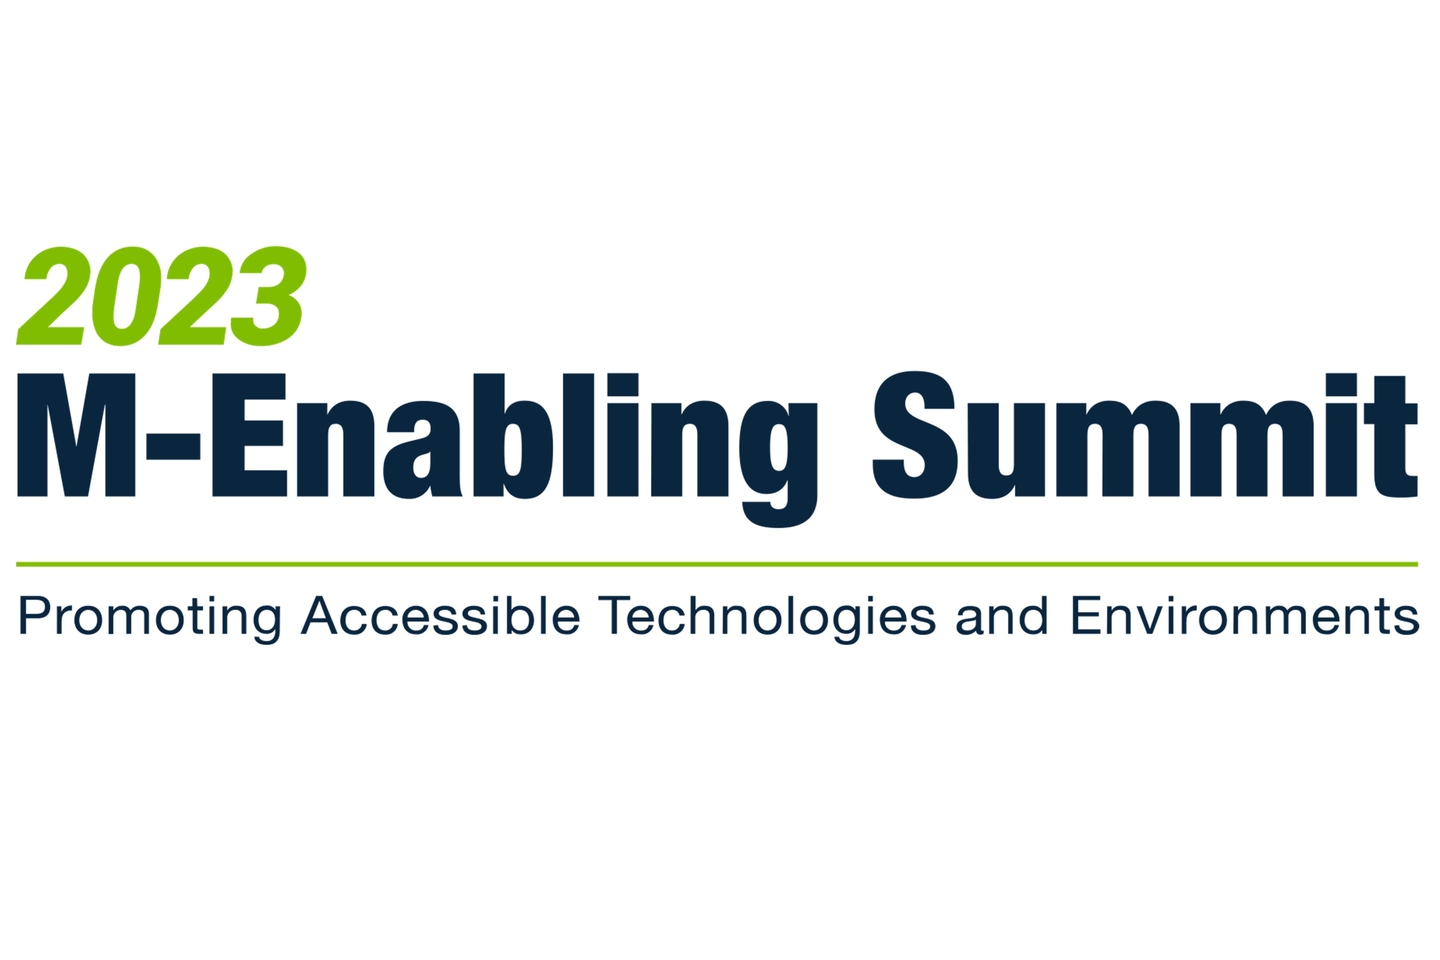 Logo with dark blue and green font, the 2023 M-Enabling Summit logo states: 2023 M-Enabling Summit. Promoting accessible technologies and environments.